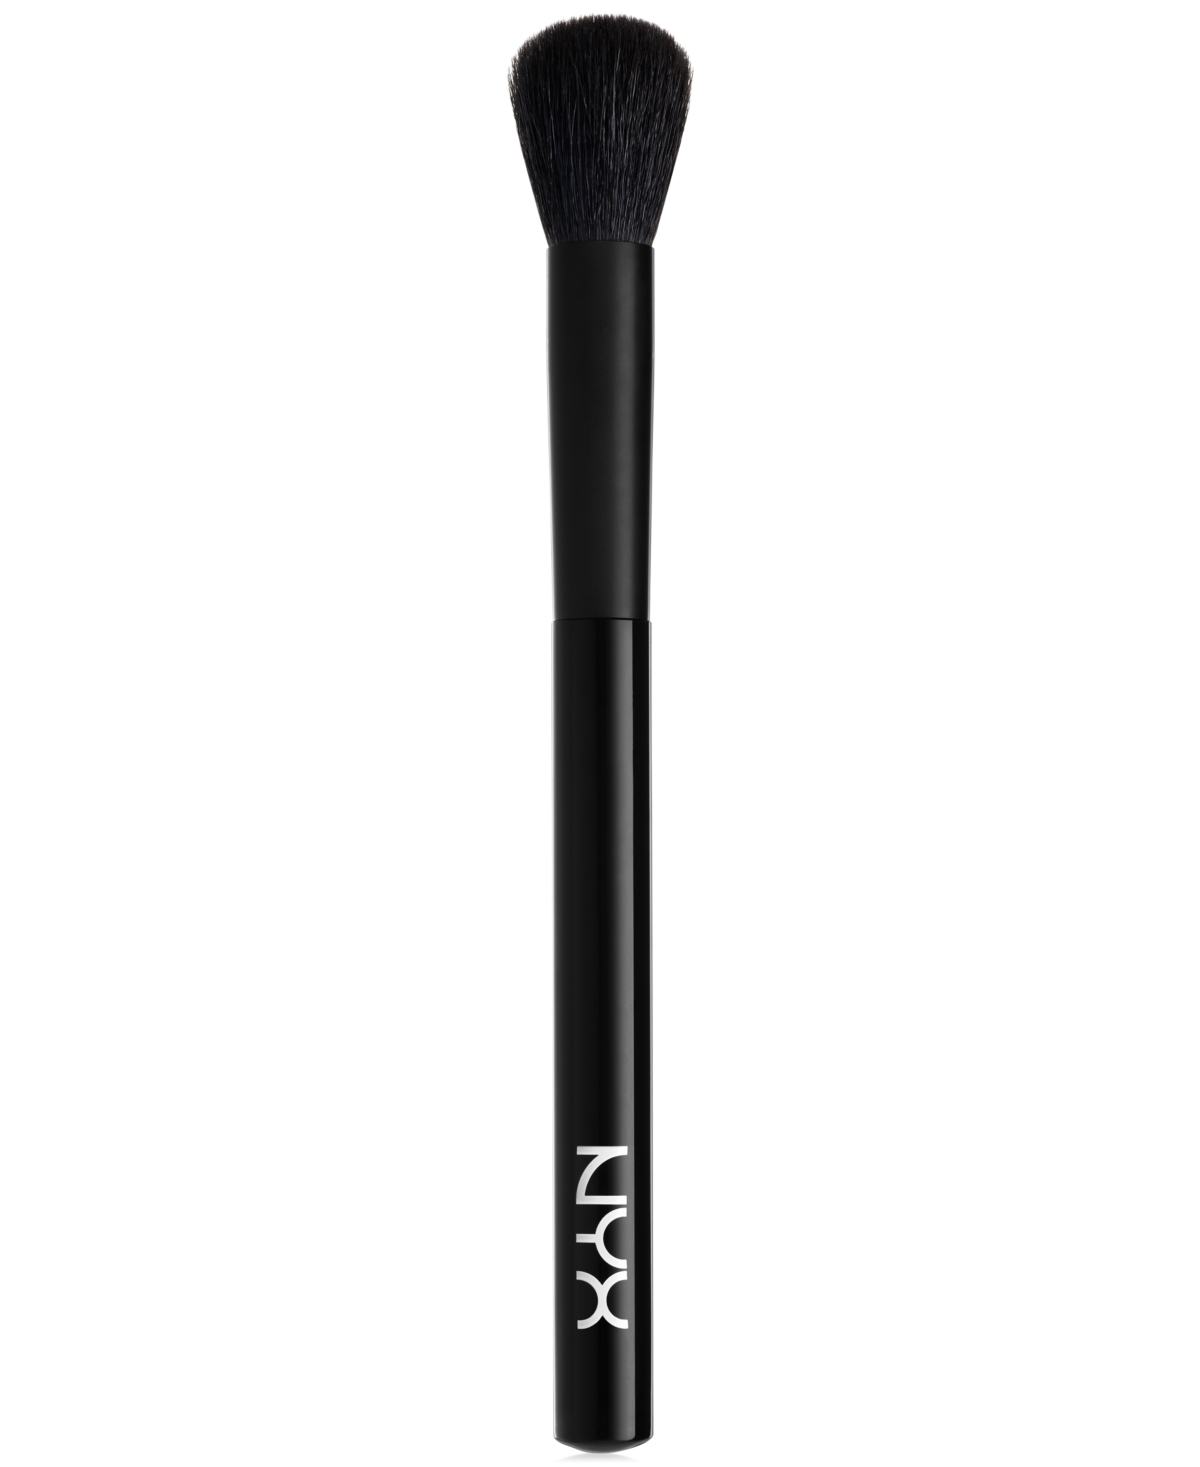 Pro Contour Brush, Created for Macy's - Open